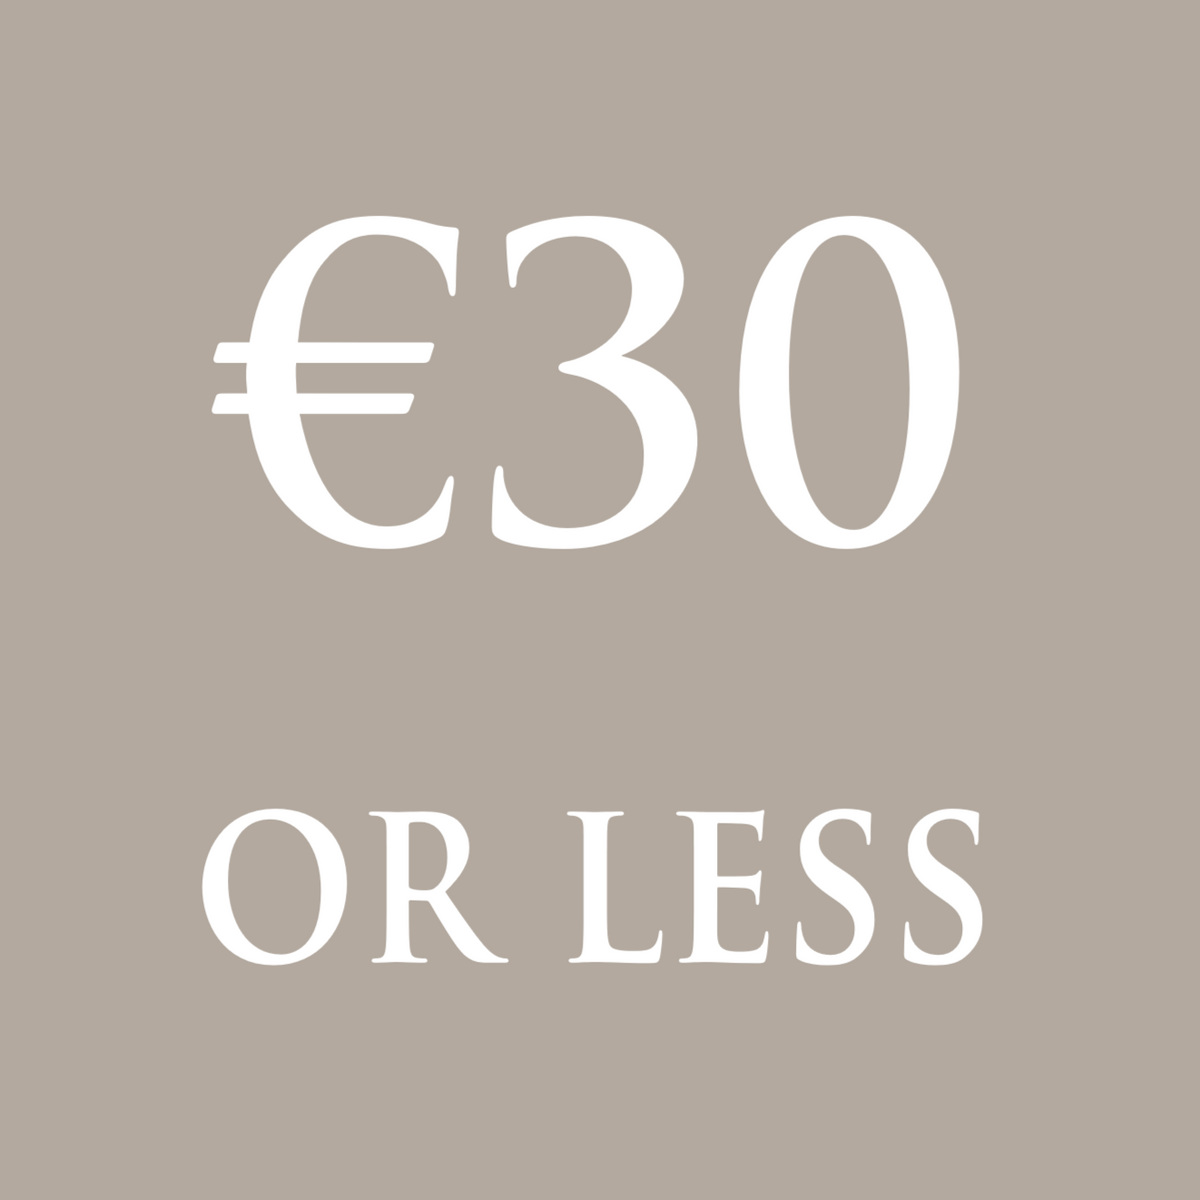 €30 or less